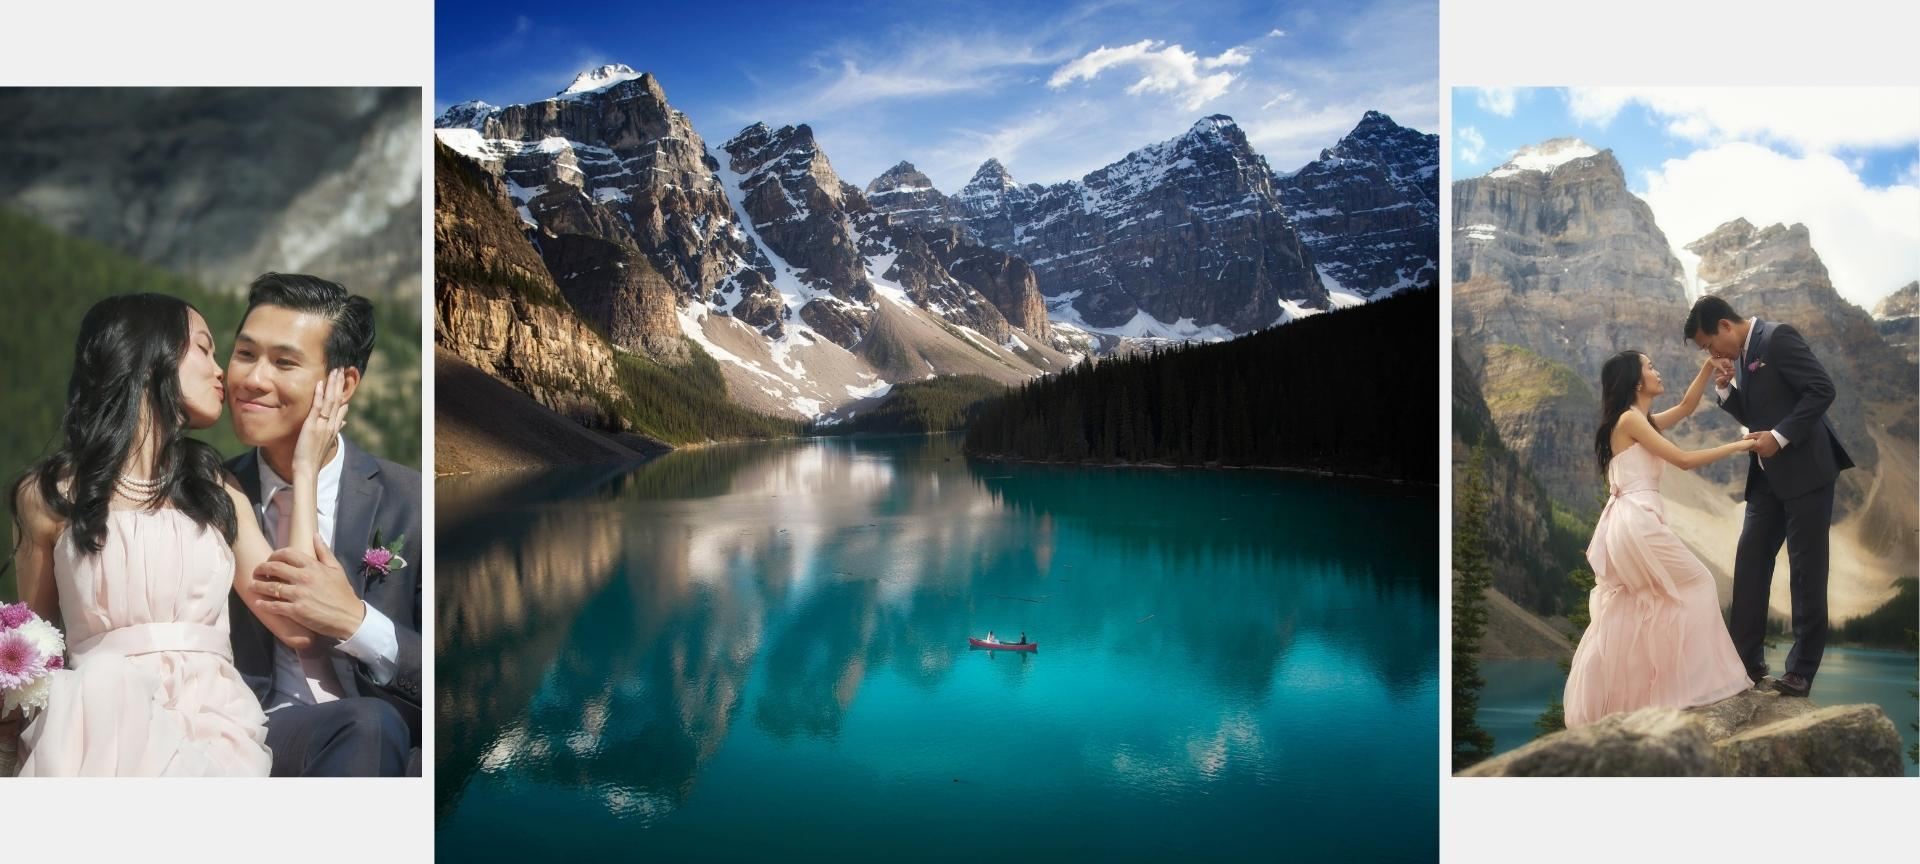 rocky mountains elopement at moraine lake - wedding ceremony with canoe adventure & hike